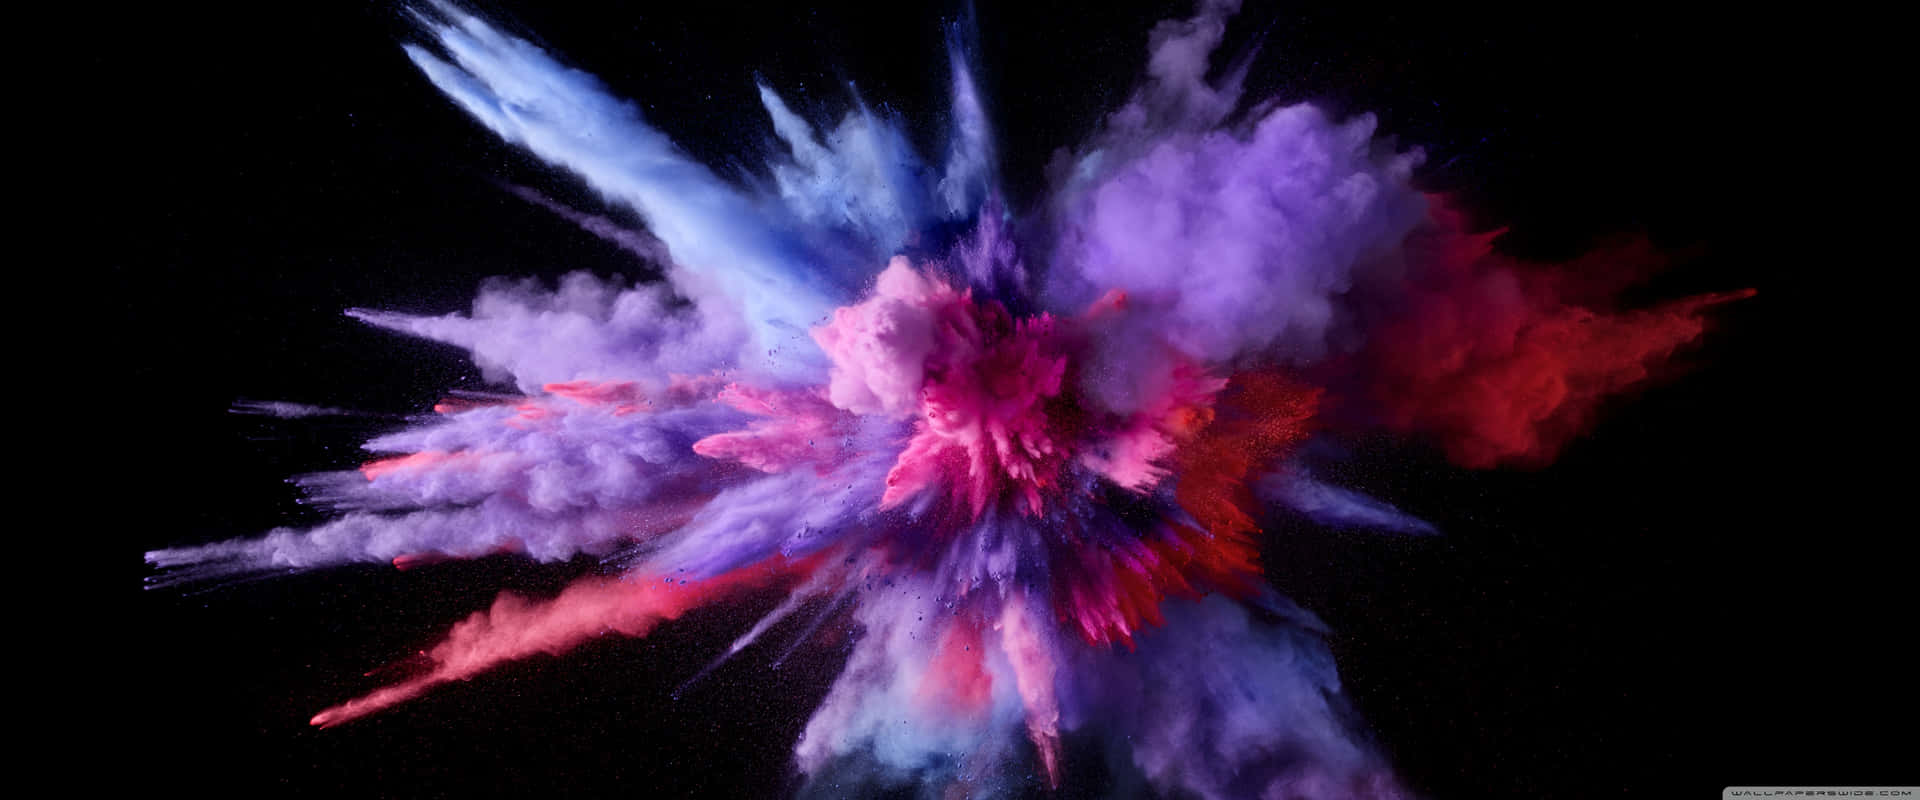 A Colorful Explosion Of Powder On A Black Background Wallpaper